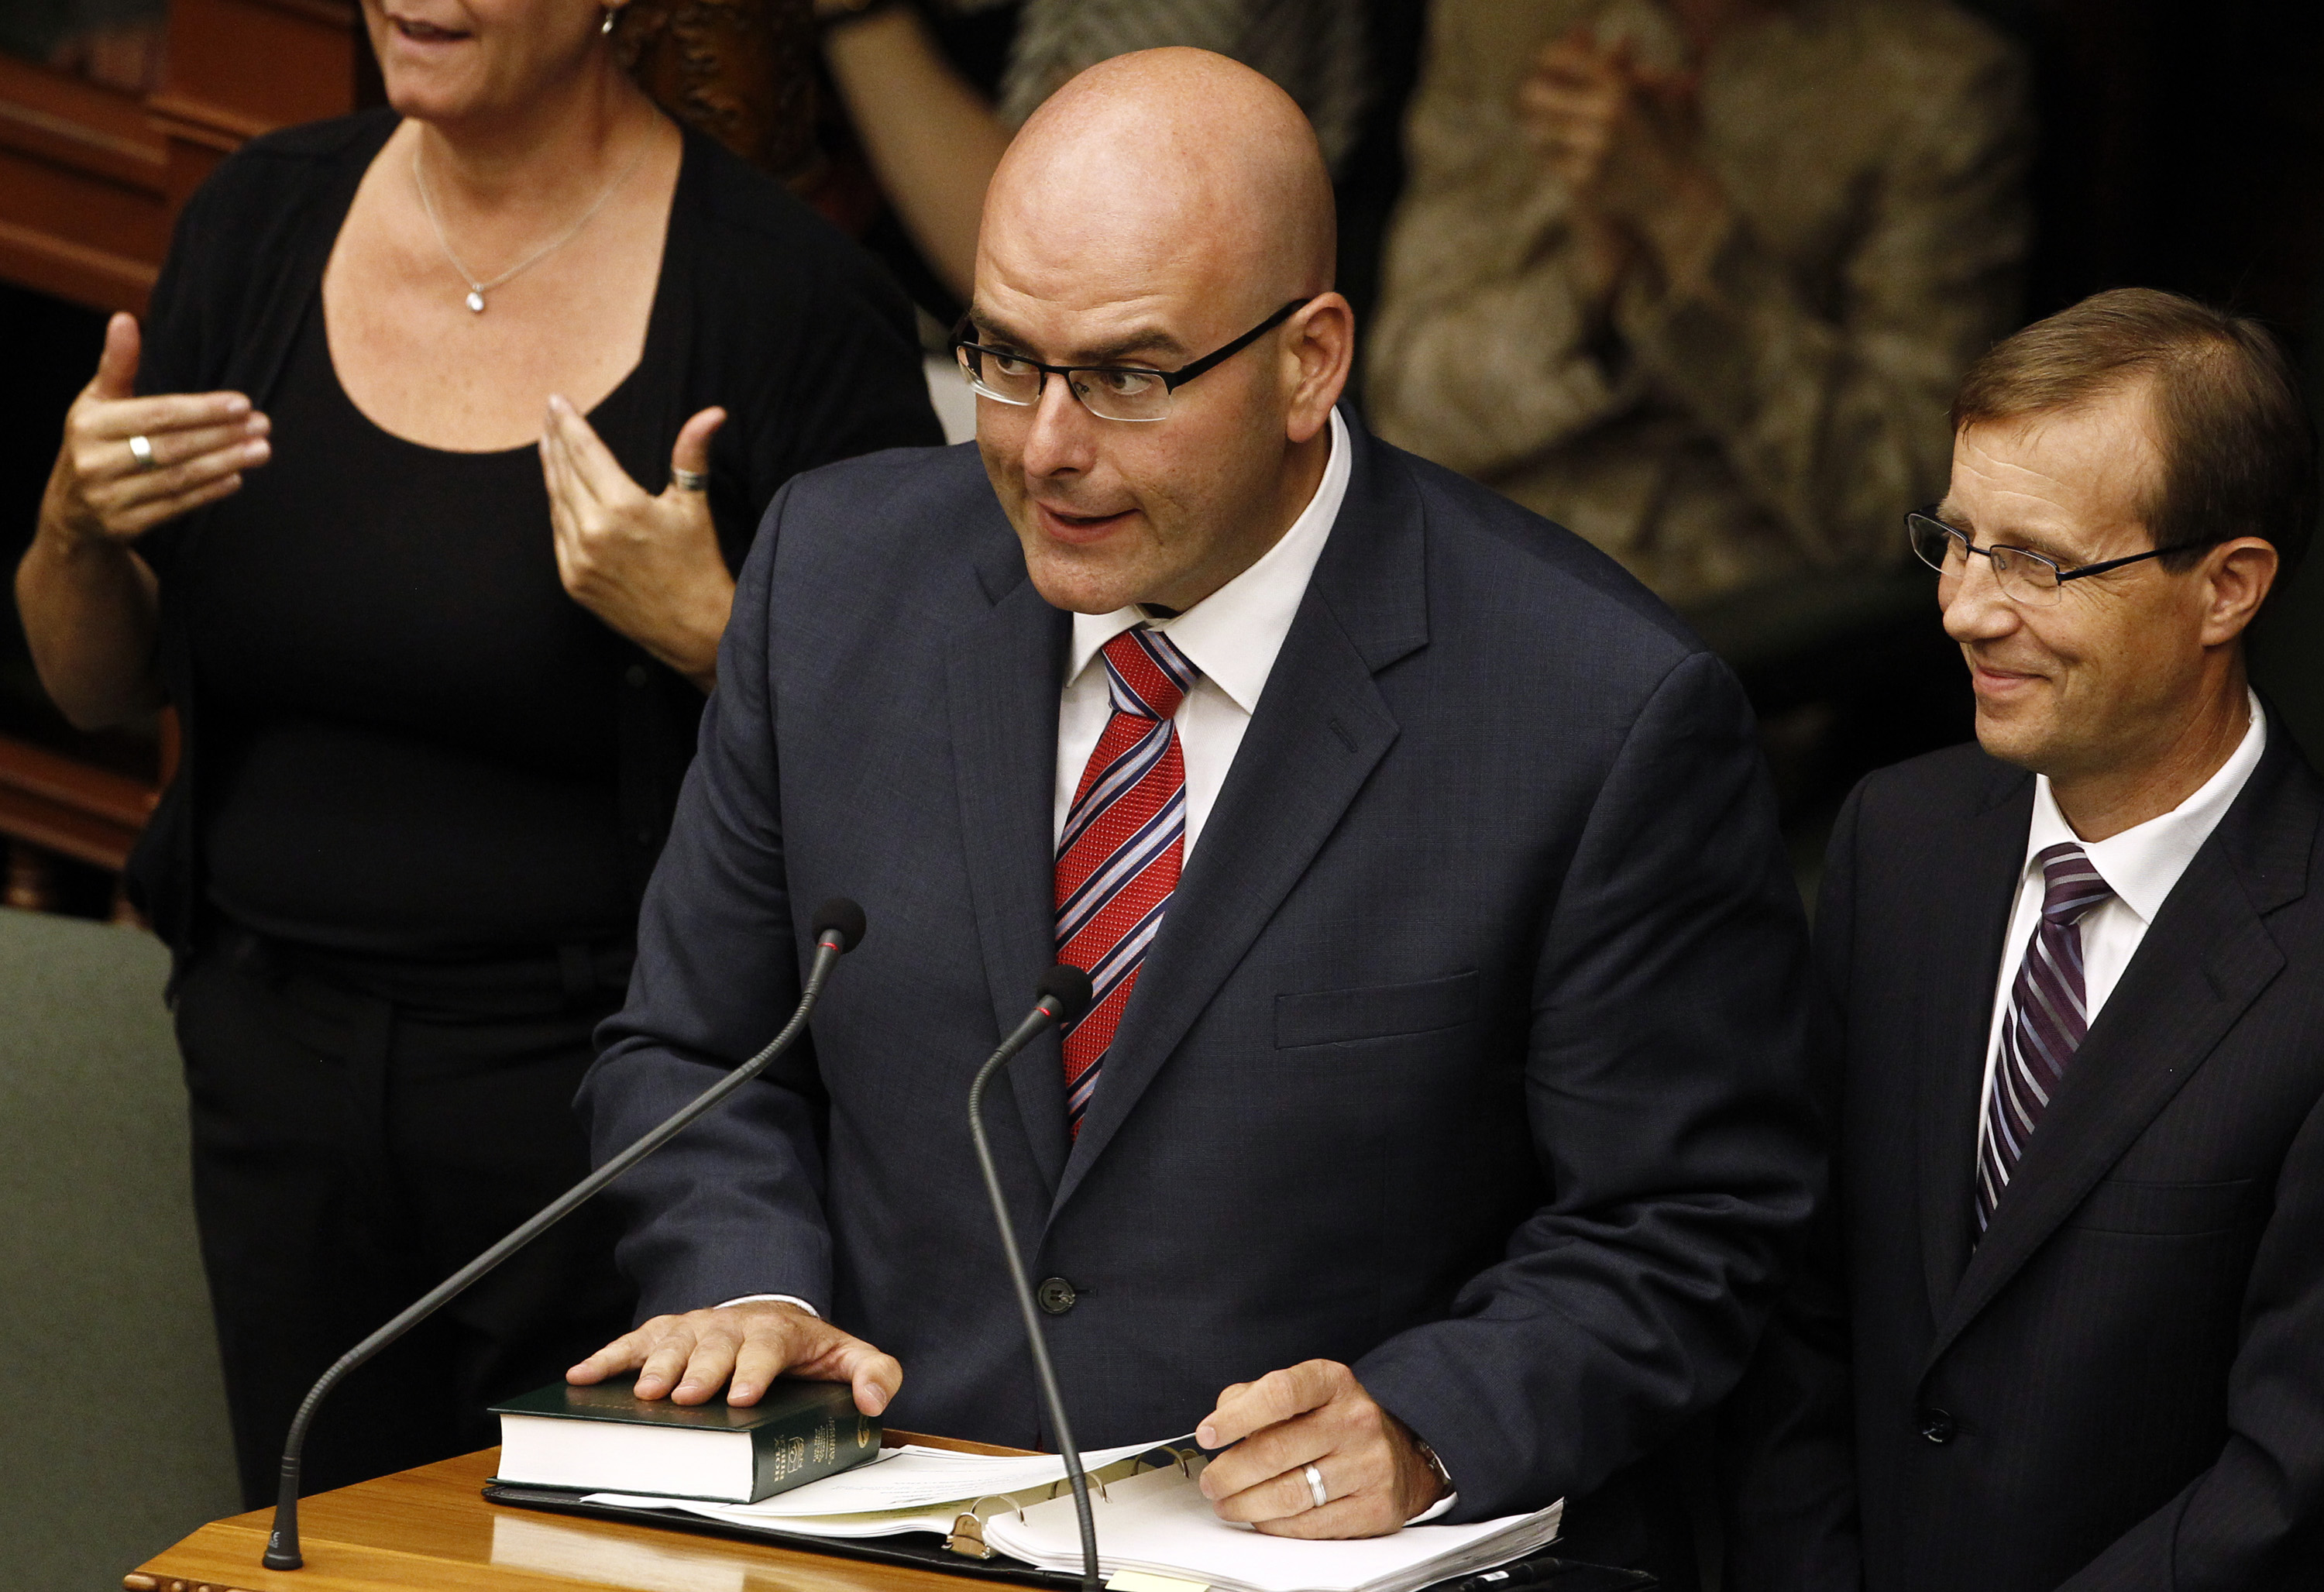 Ontario Minister of Transportation Del Duca speaks during the swearing-in ceremony for members of the executive council of the province of Ontario in Toronto